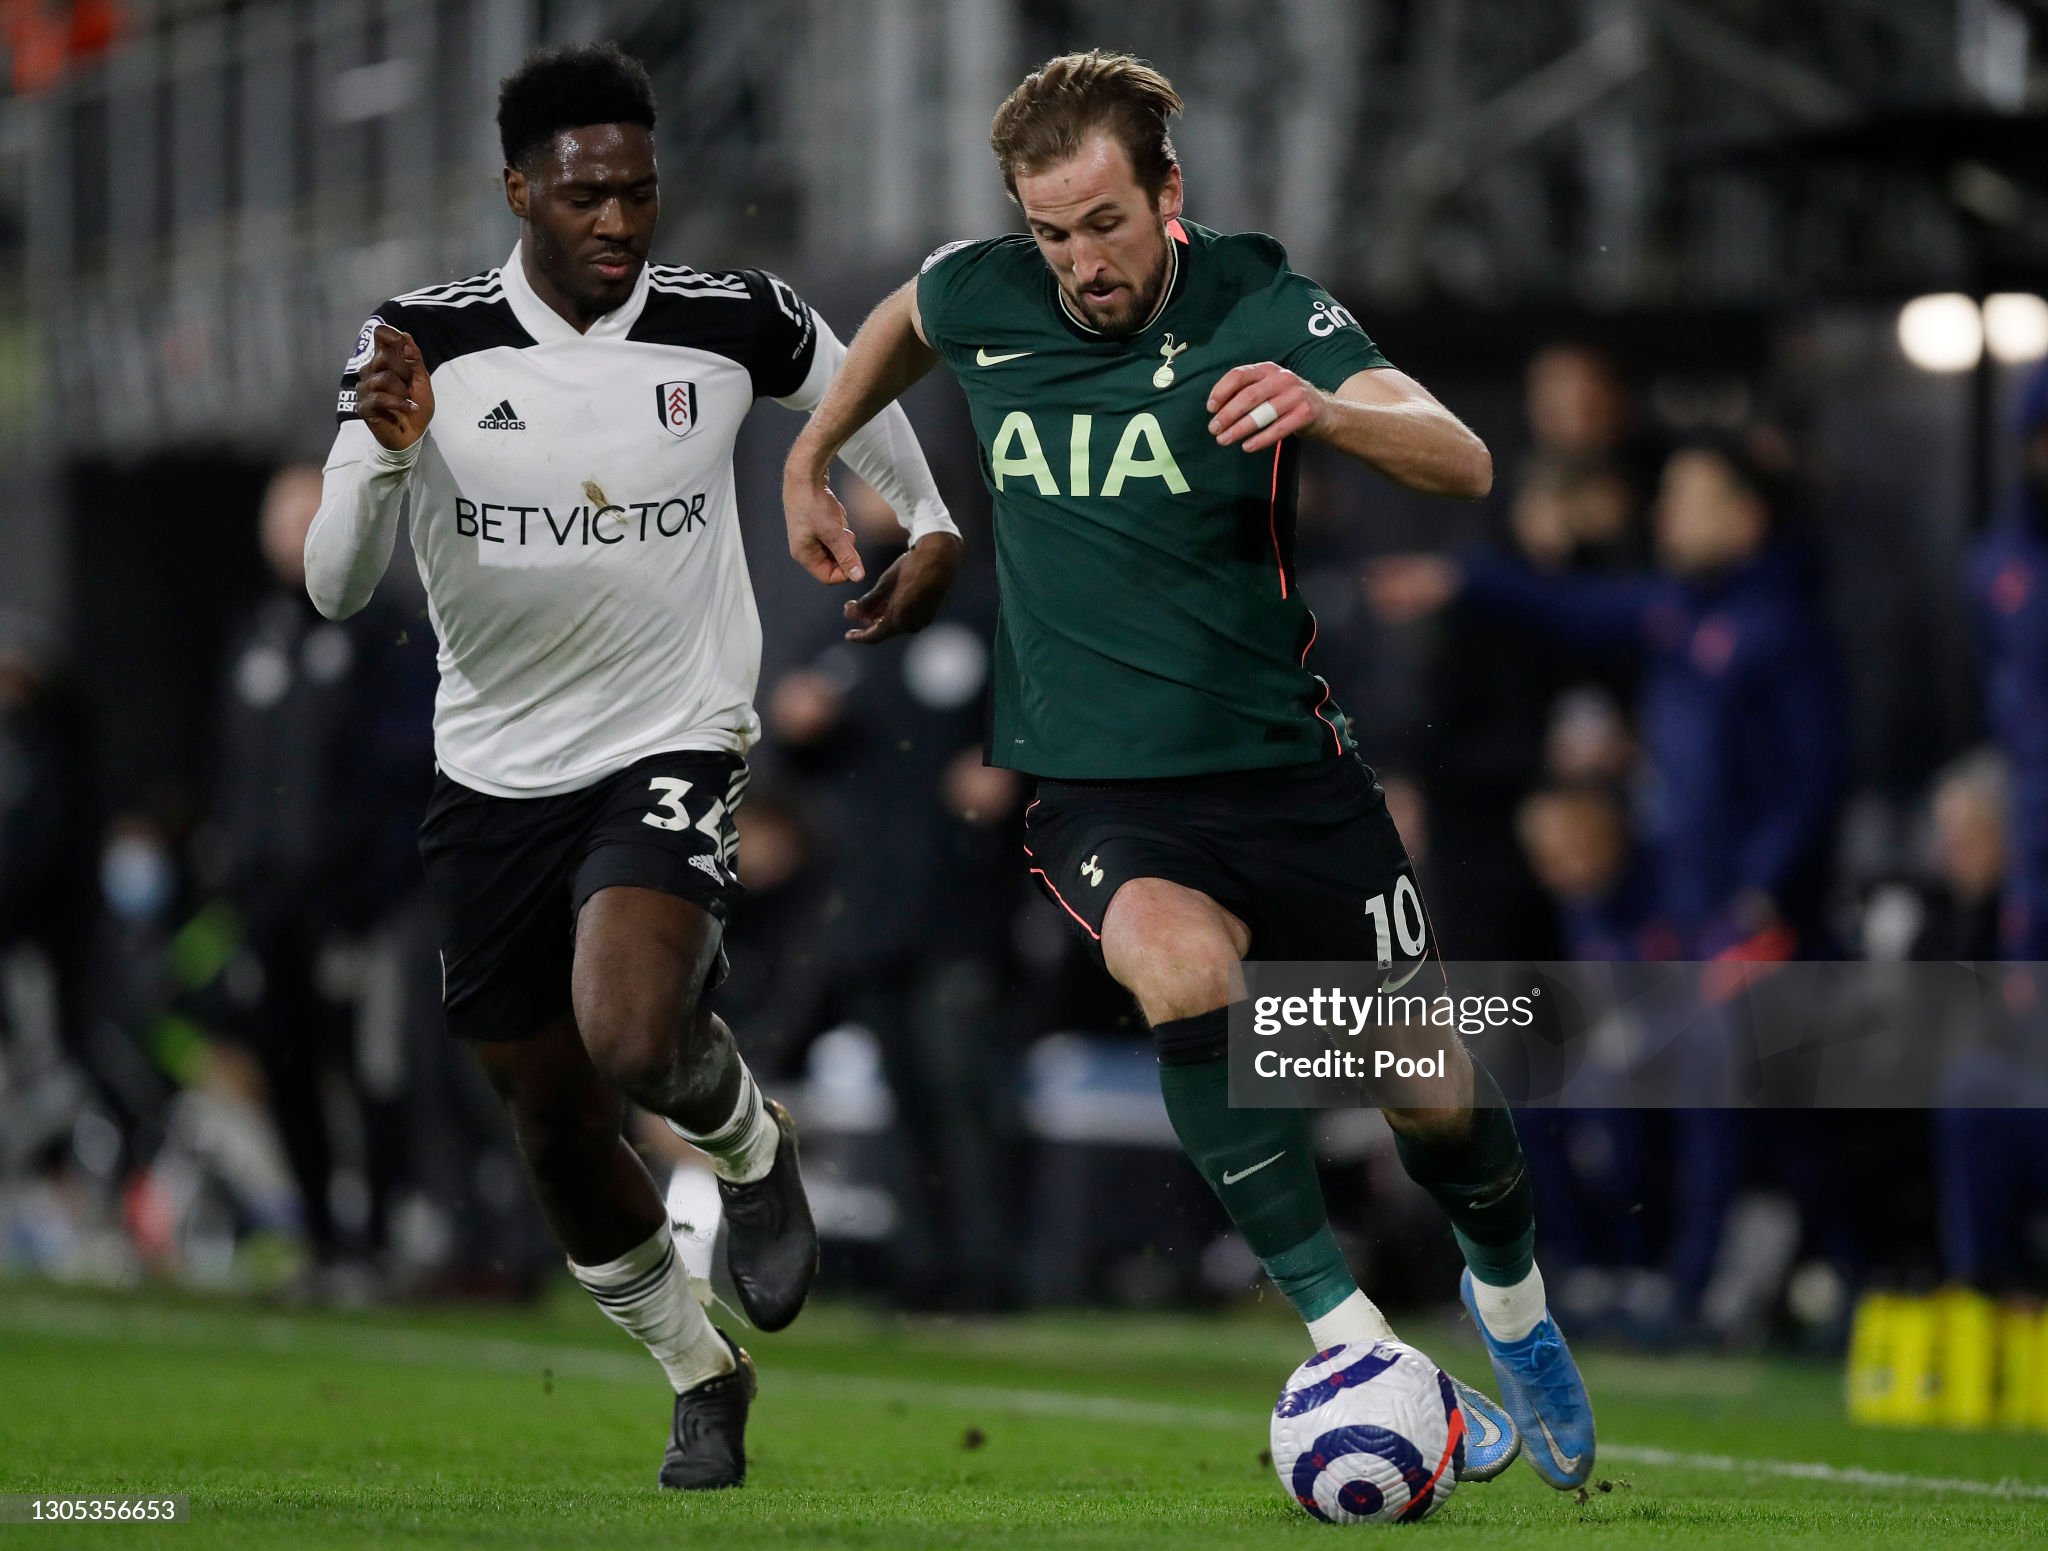 Fulham vs Tottenham preview, prediction and odds